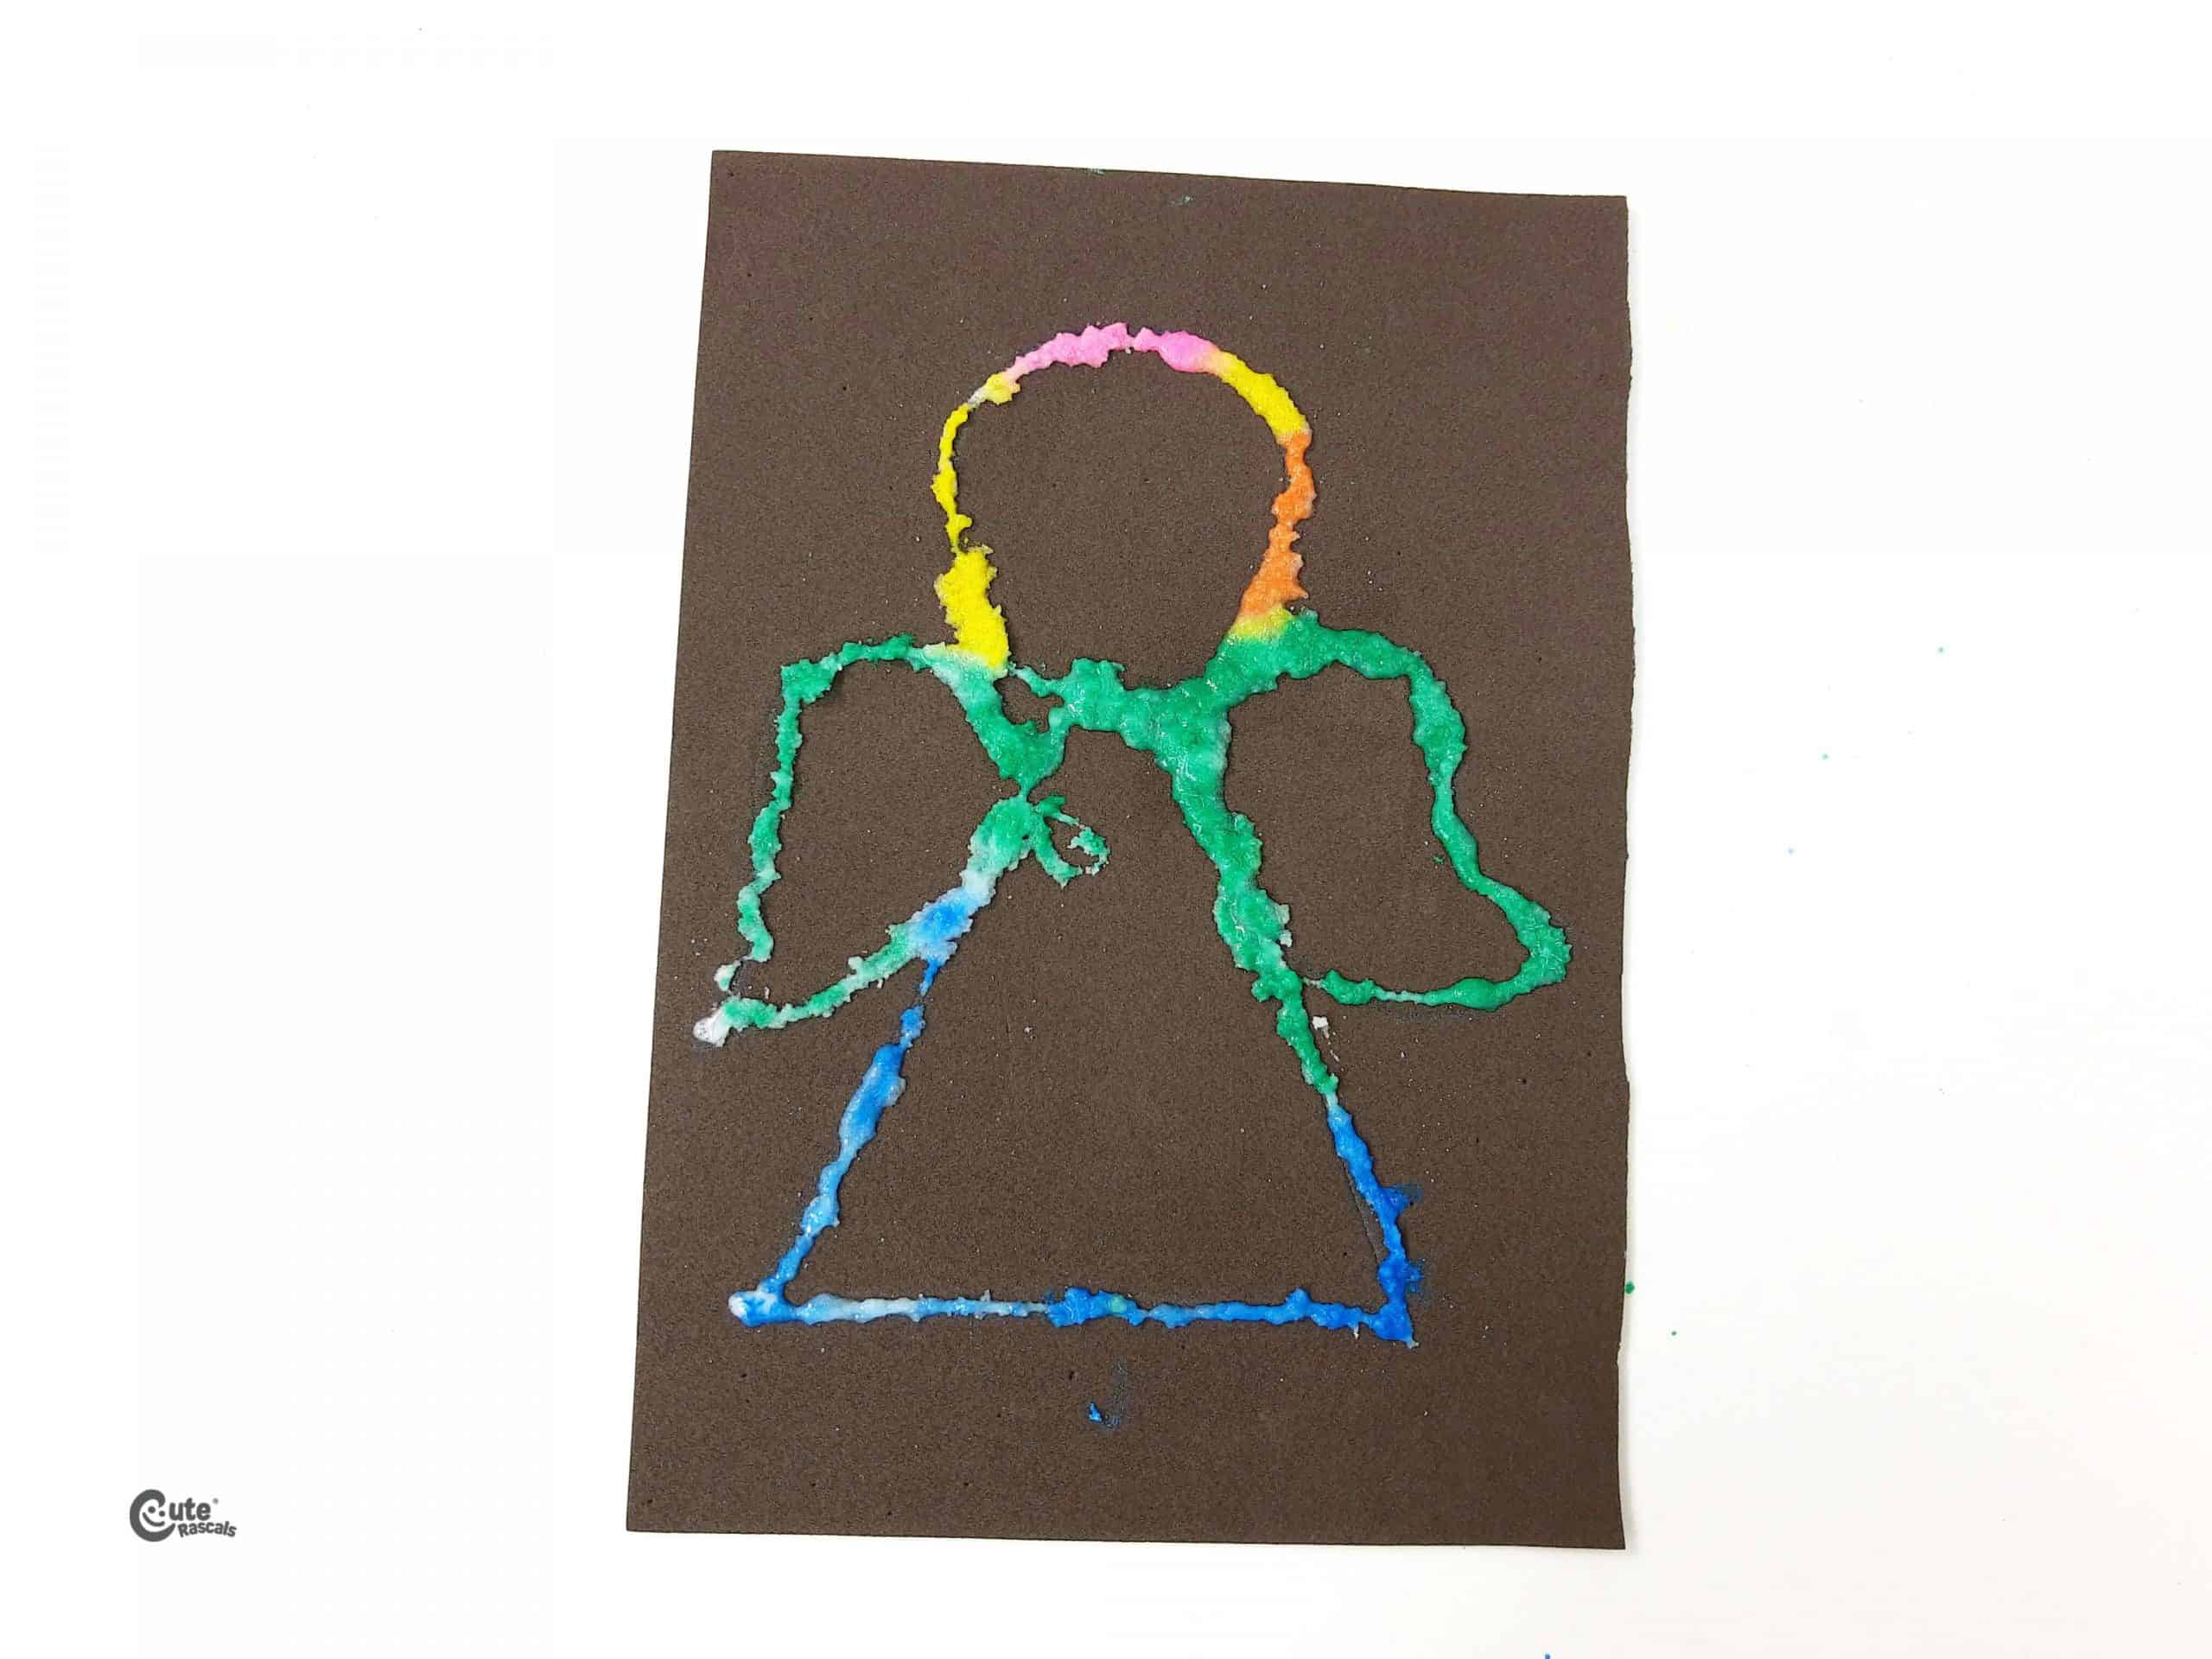 Angel made with salt, glue and watercolors. Easter art projects for preschoolers